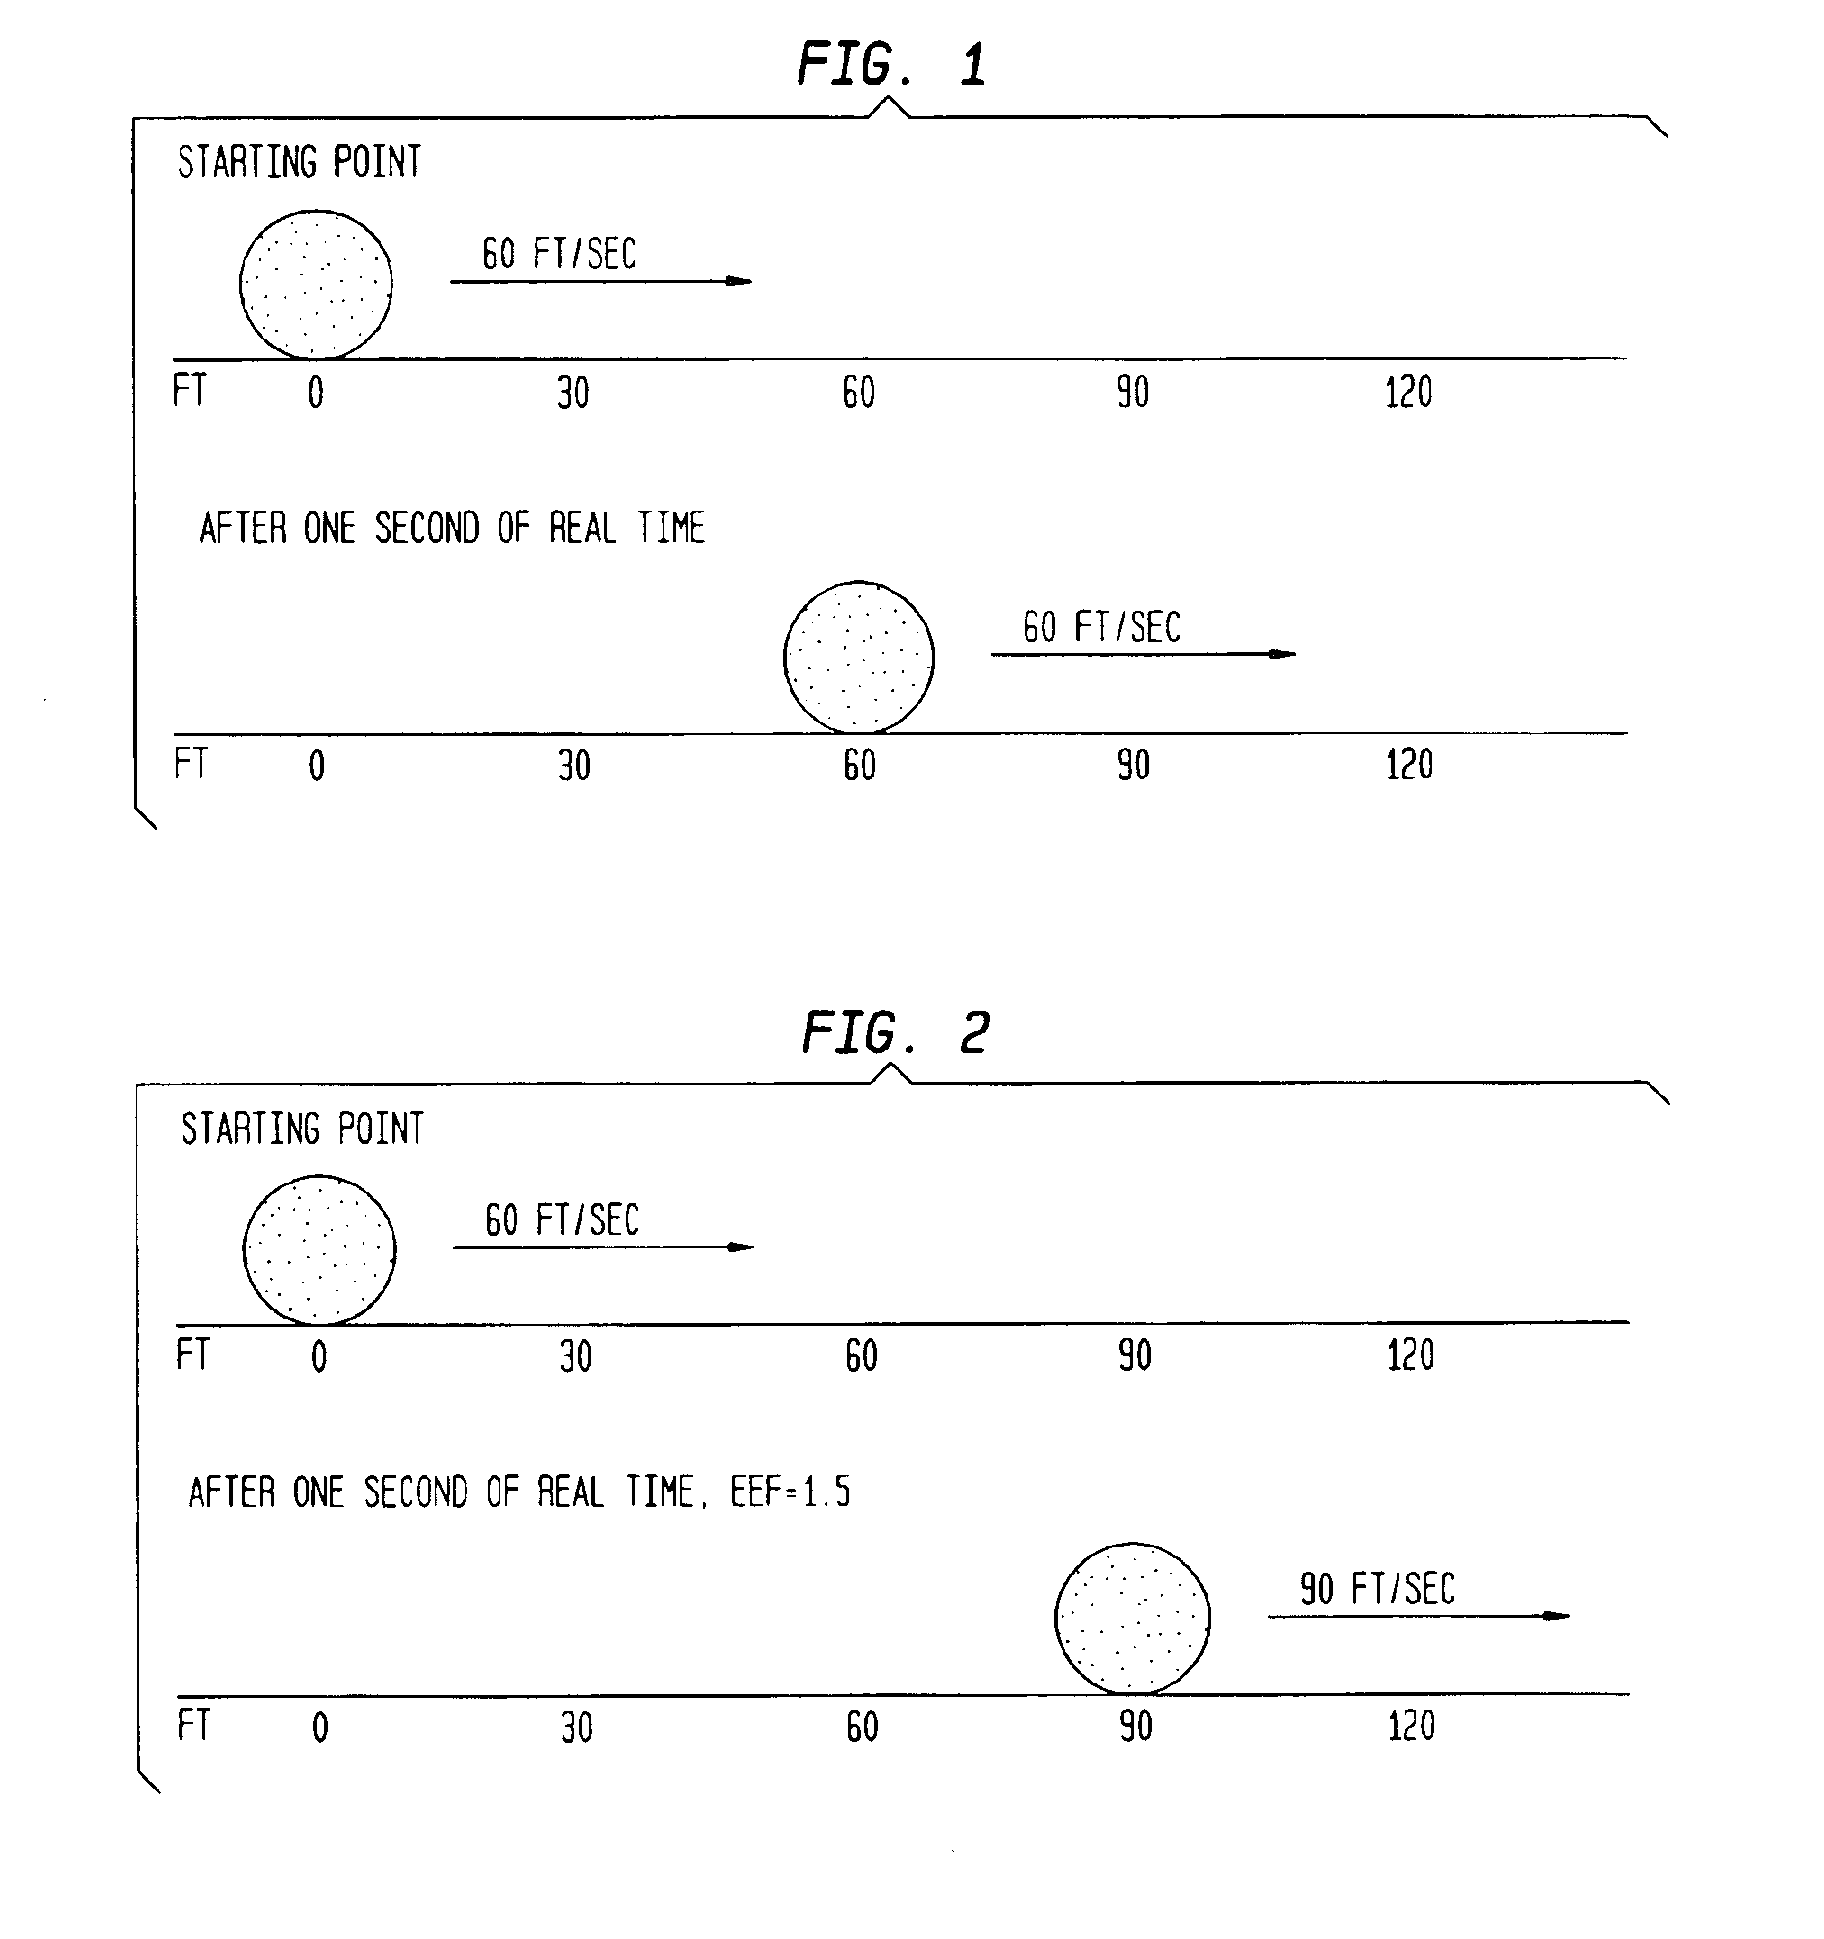 Method of measuring performance of an emulator and for adjusting emulator operation in response thereto